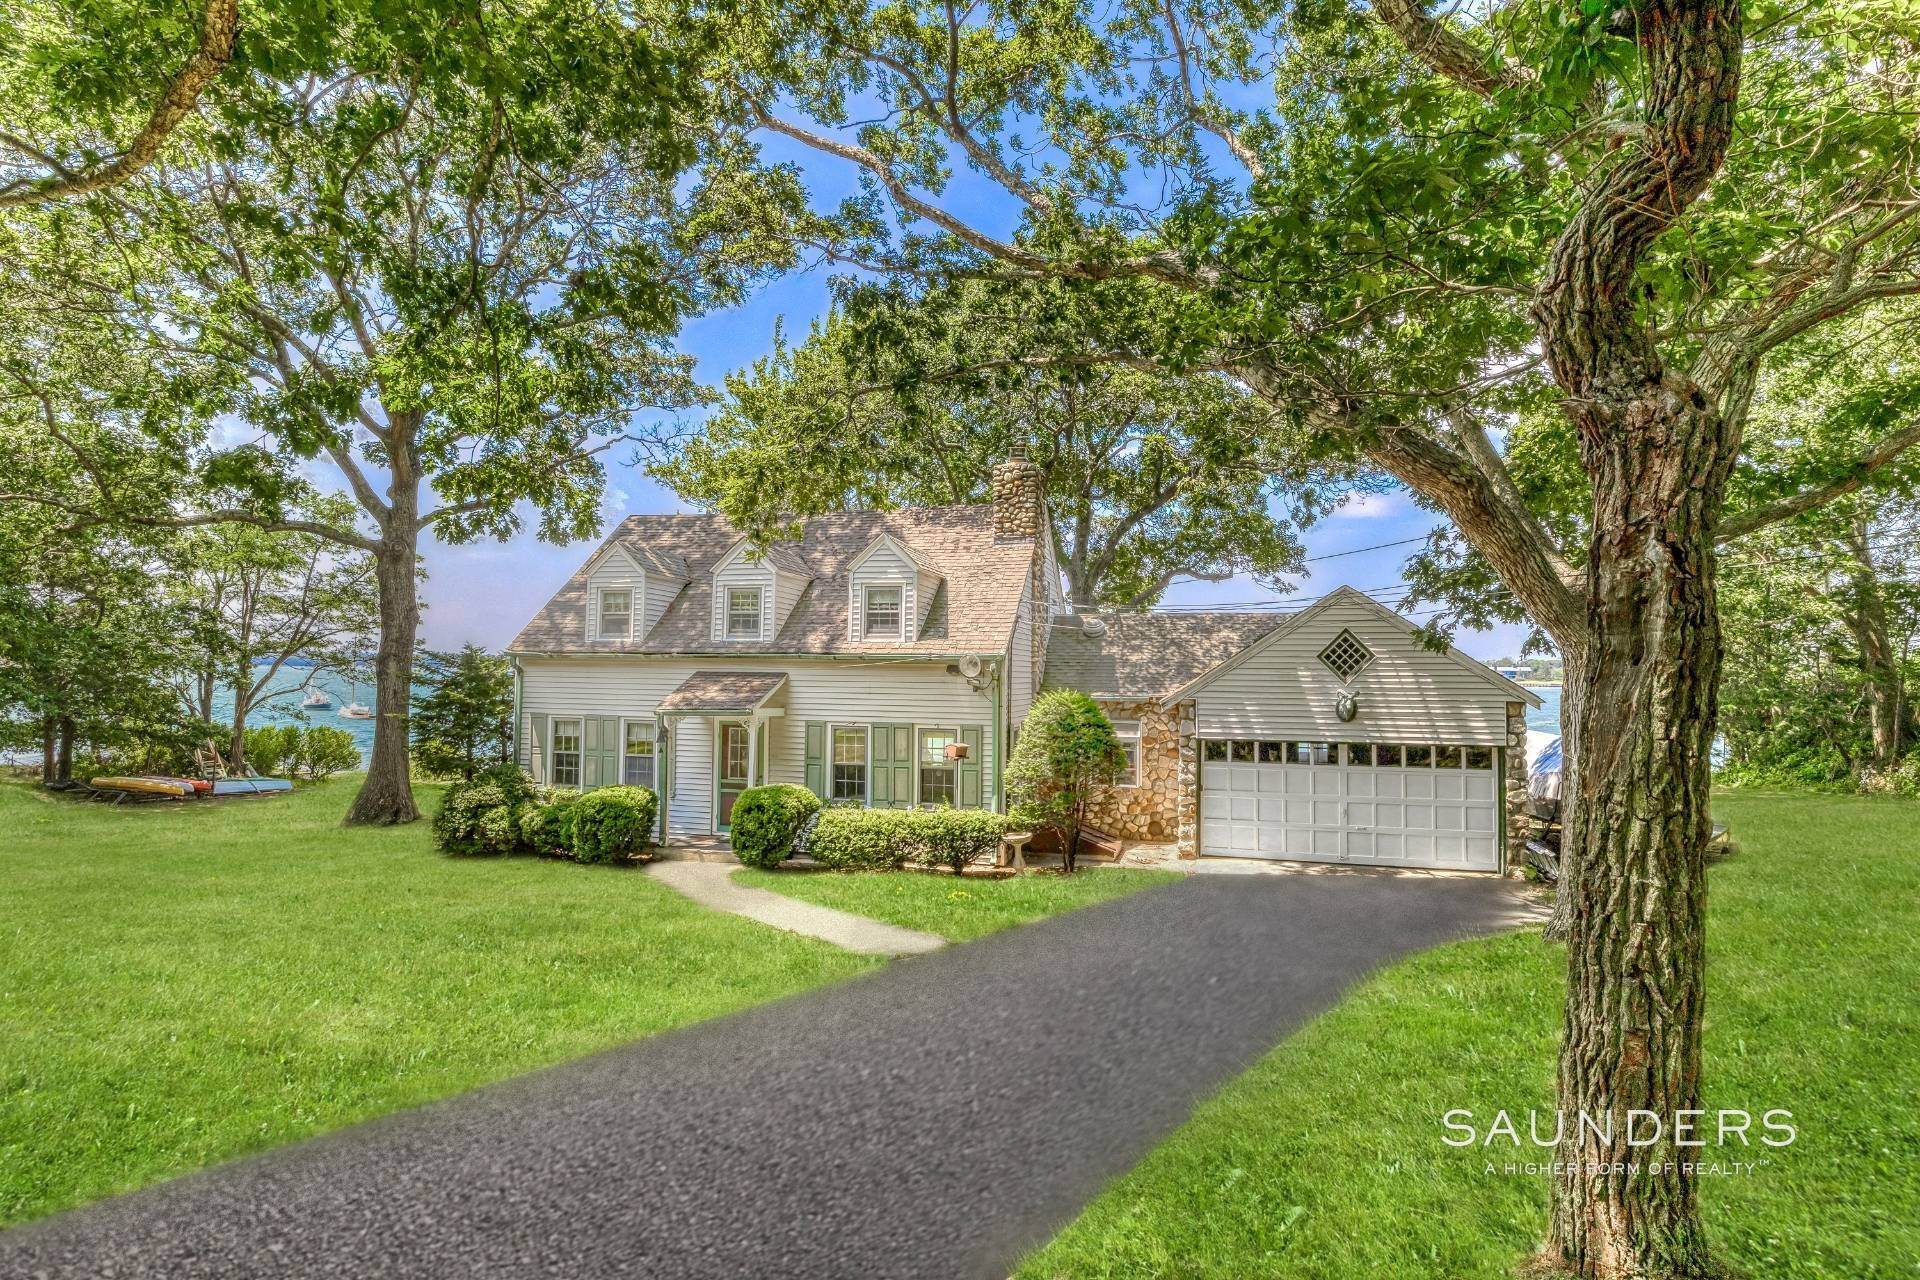 44. Single Family Homes for Sale at Shelter Island 1937 Cape Cod Harborfront With Deepwater Dock 6-6a South Ram Island Drive, Shelter Island, NY 11964